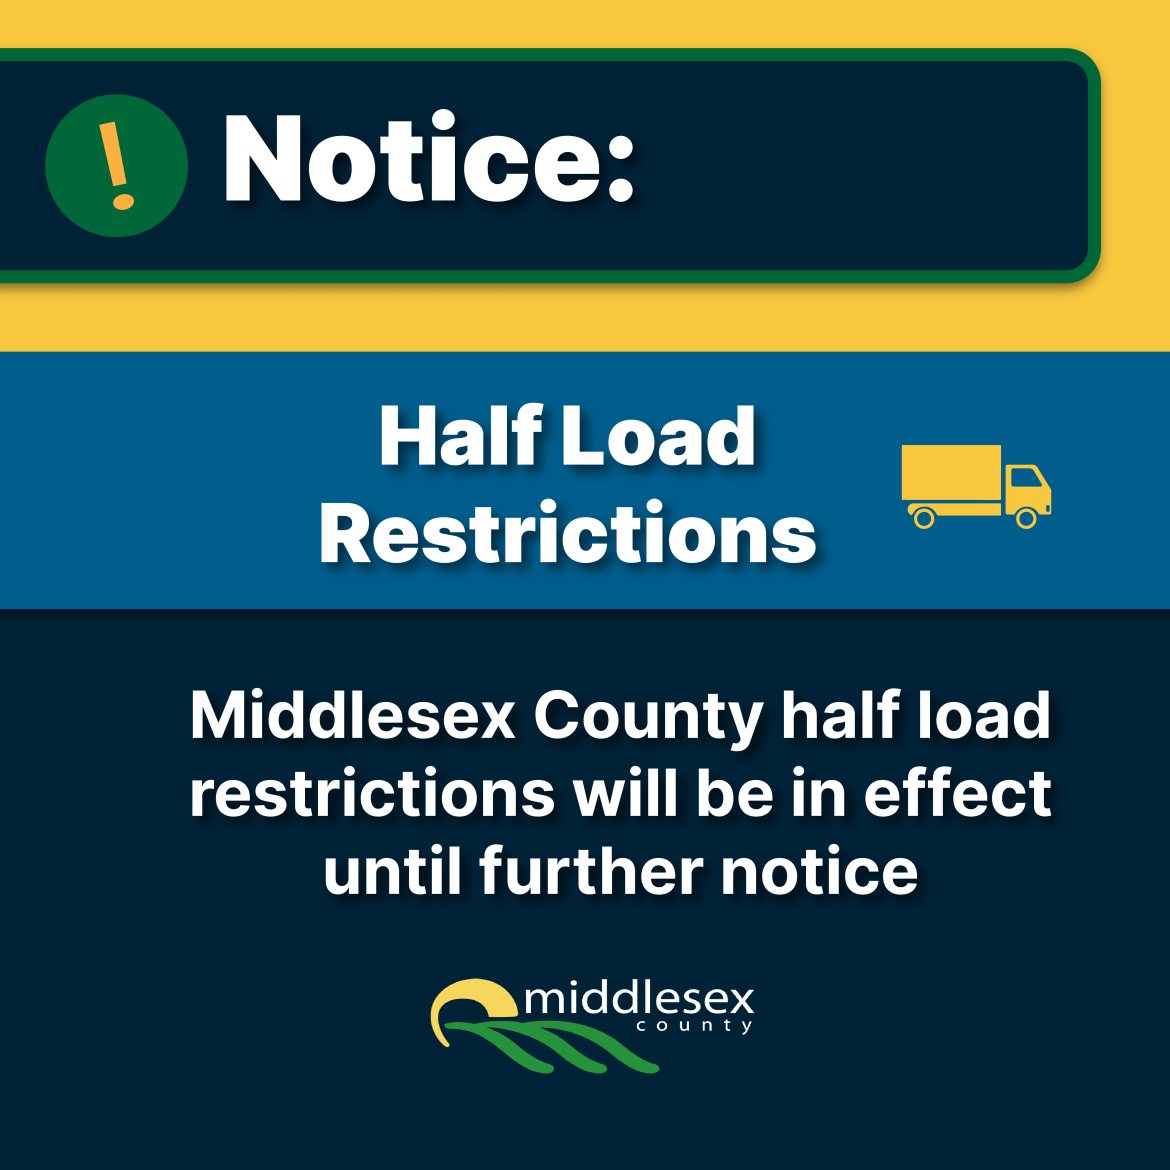 Half Load Restrictions in Effect Middlesex County